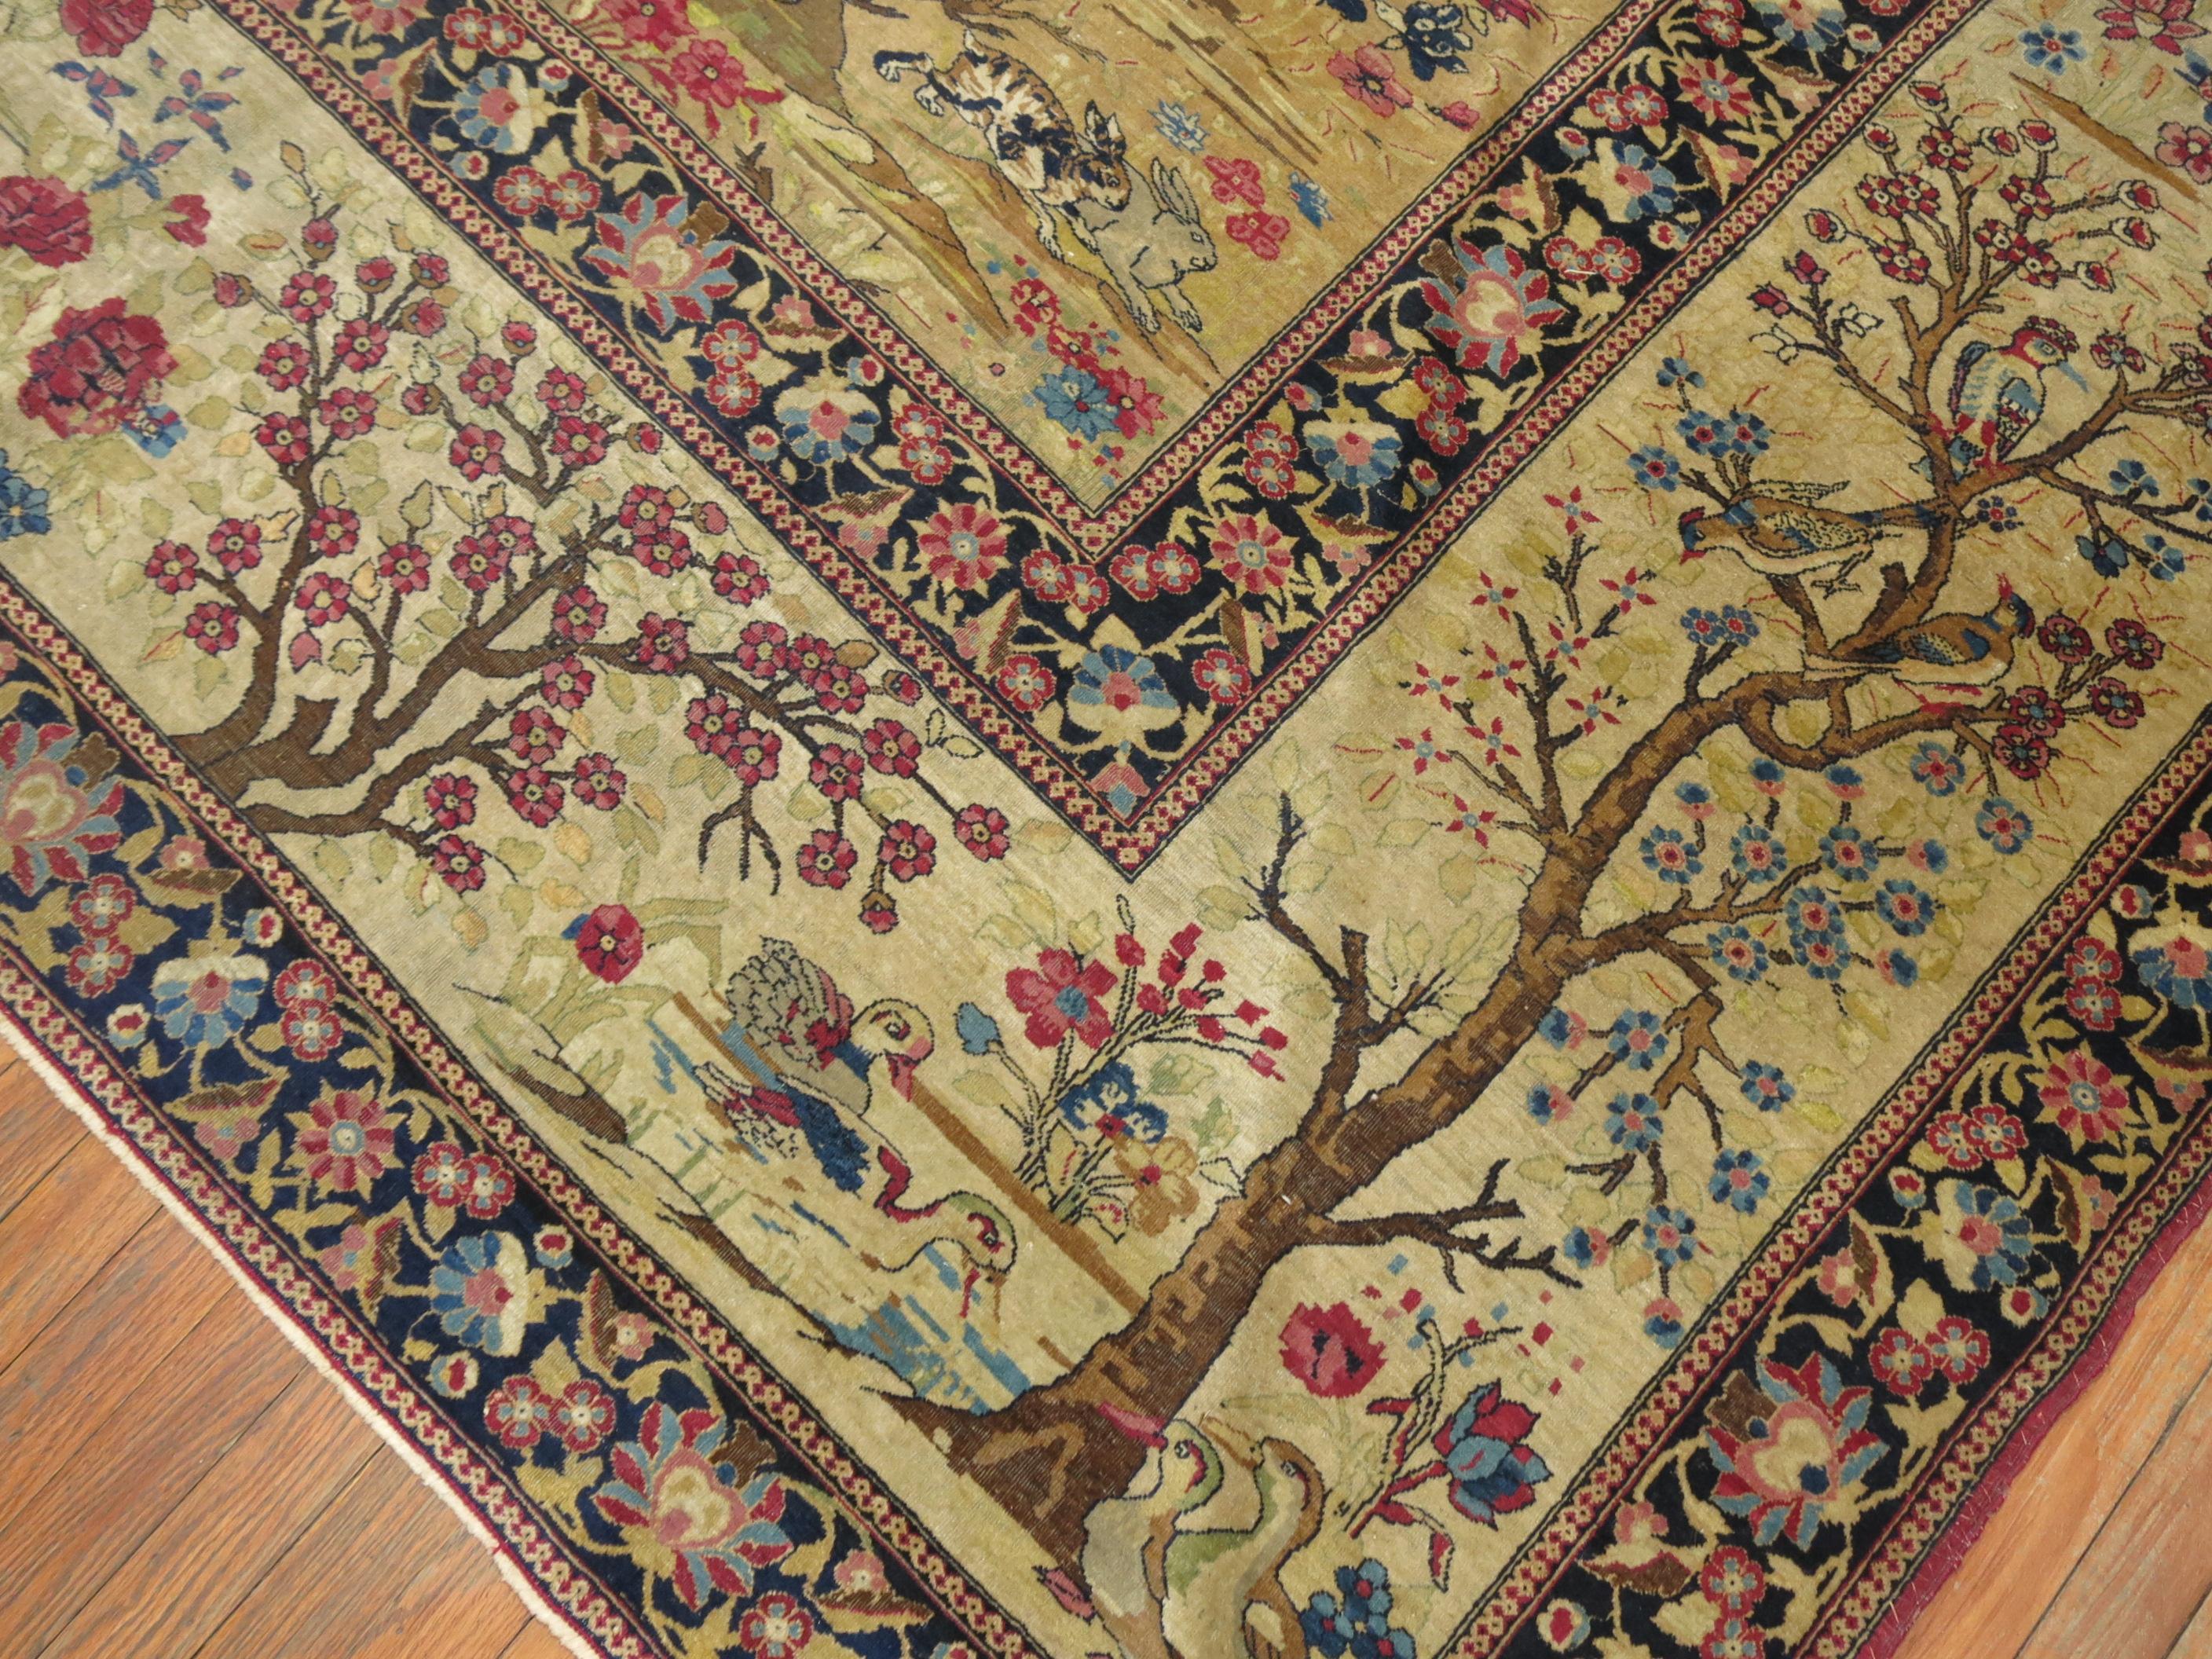 Persian Pictorial Animal Landscape Rug 10